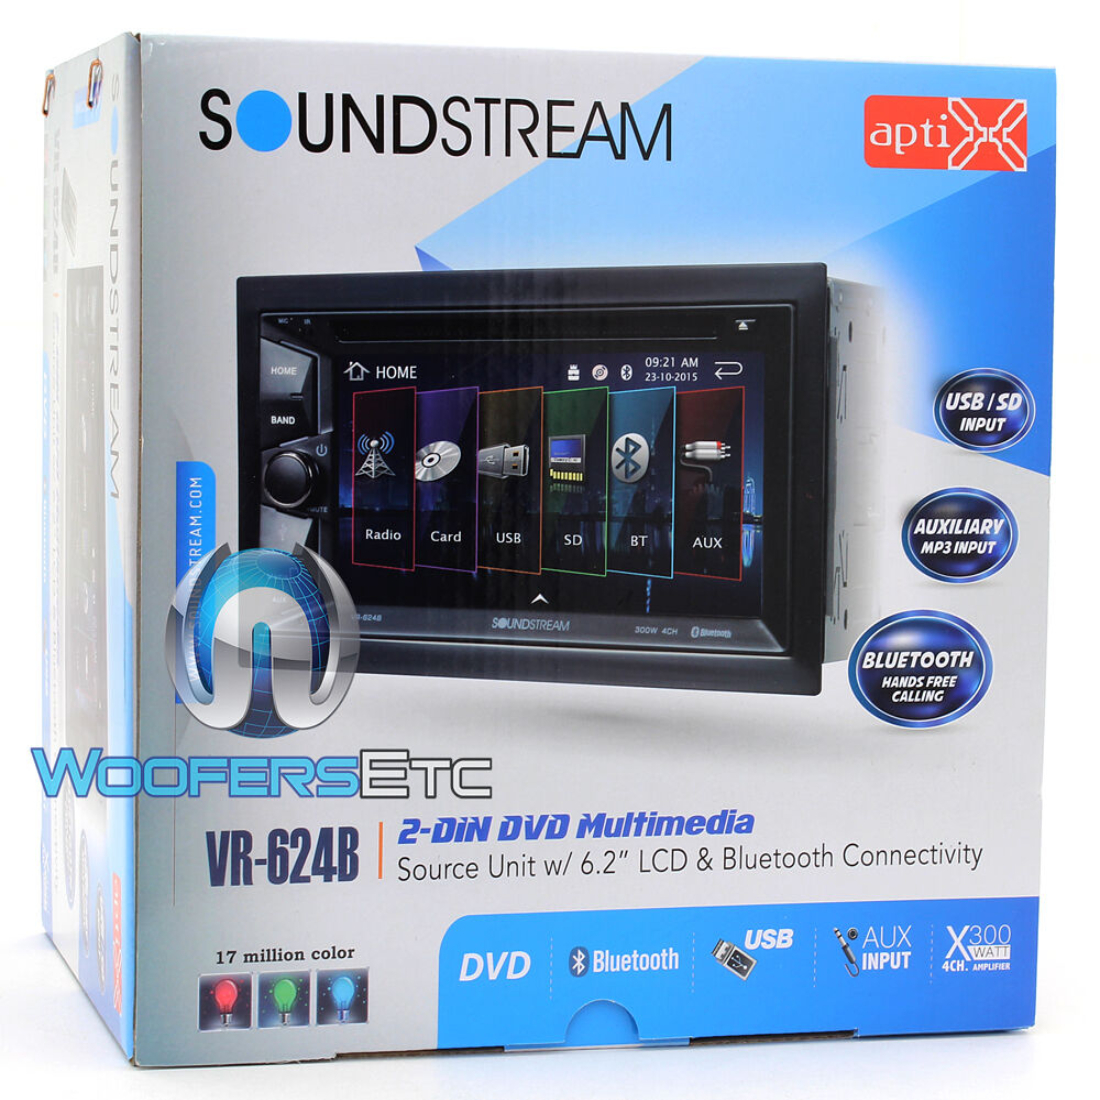 Soundstream VR-624B 6.2" Double-DIN DVD Head Unit with Bluetooth - image 3 of 3